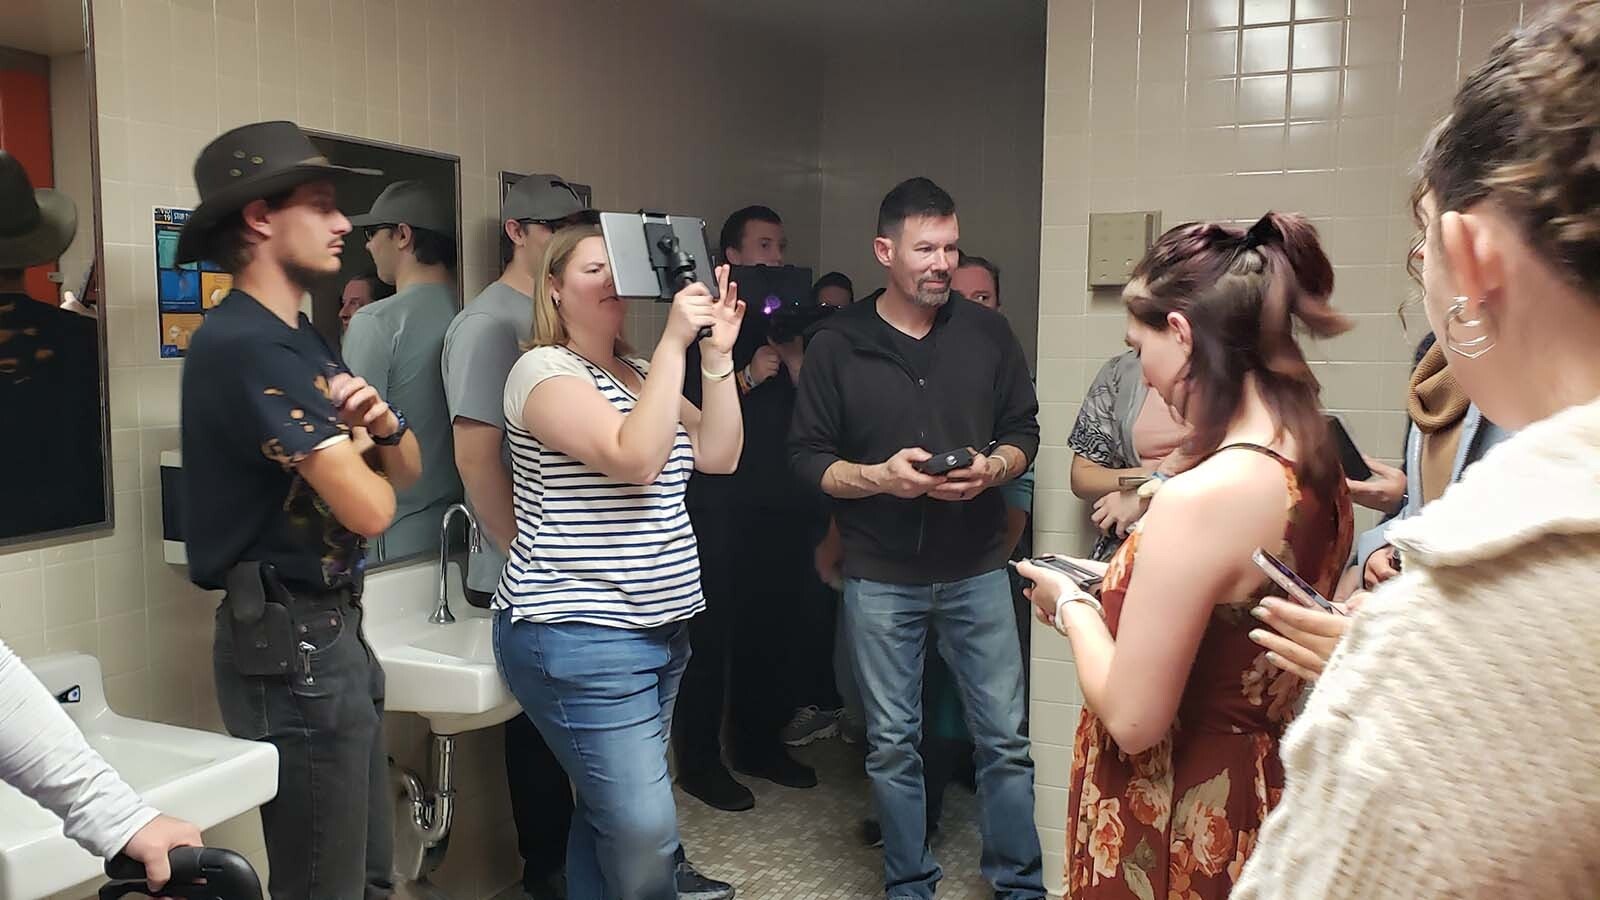 In the women's bathroom at Sweetwater County Library, ghost tour participants check spirit box apps on phones and gaze through a device that scans for electromagnetic energy.